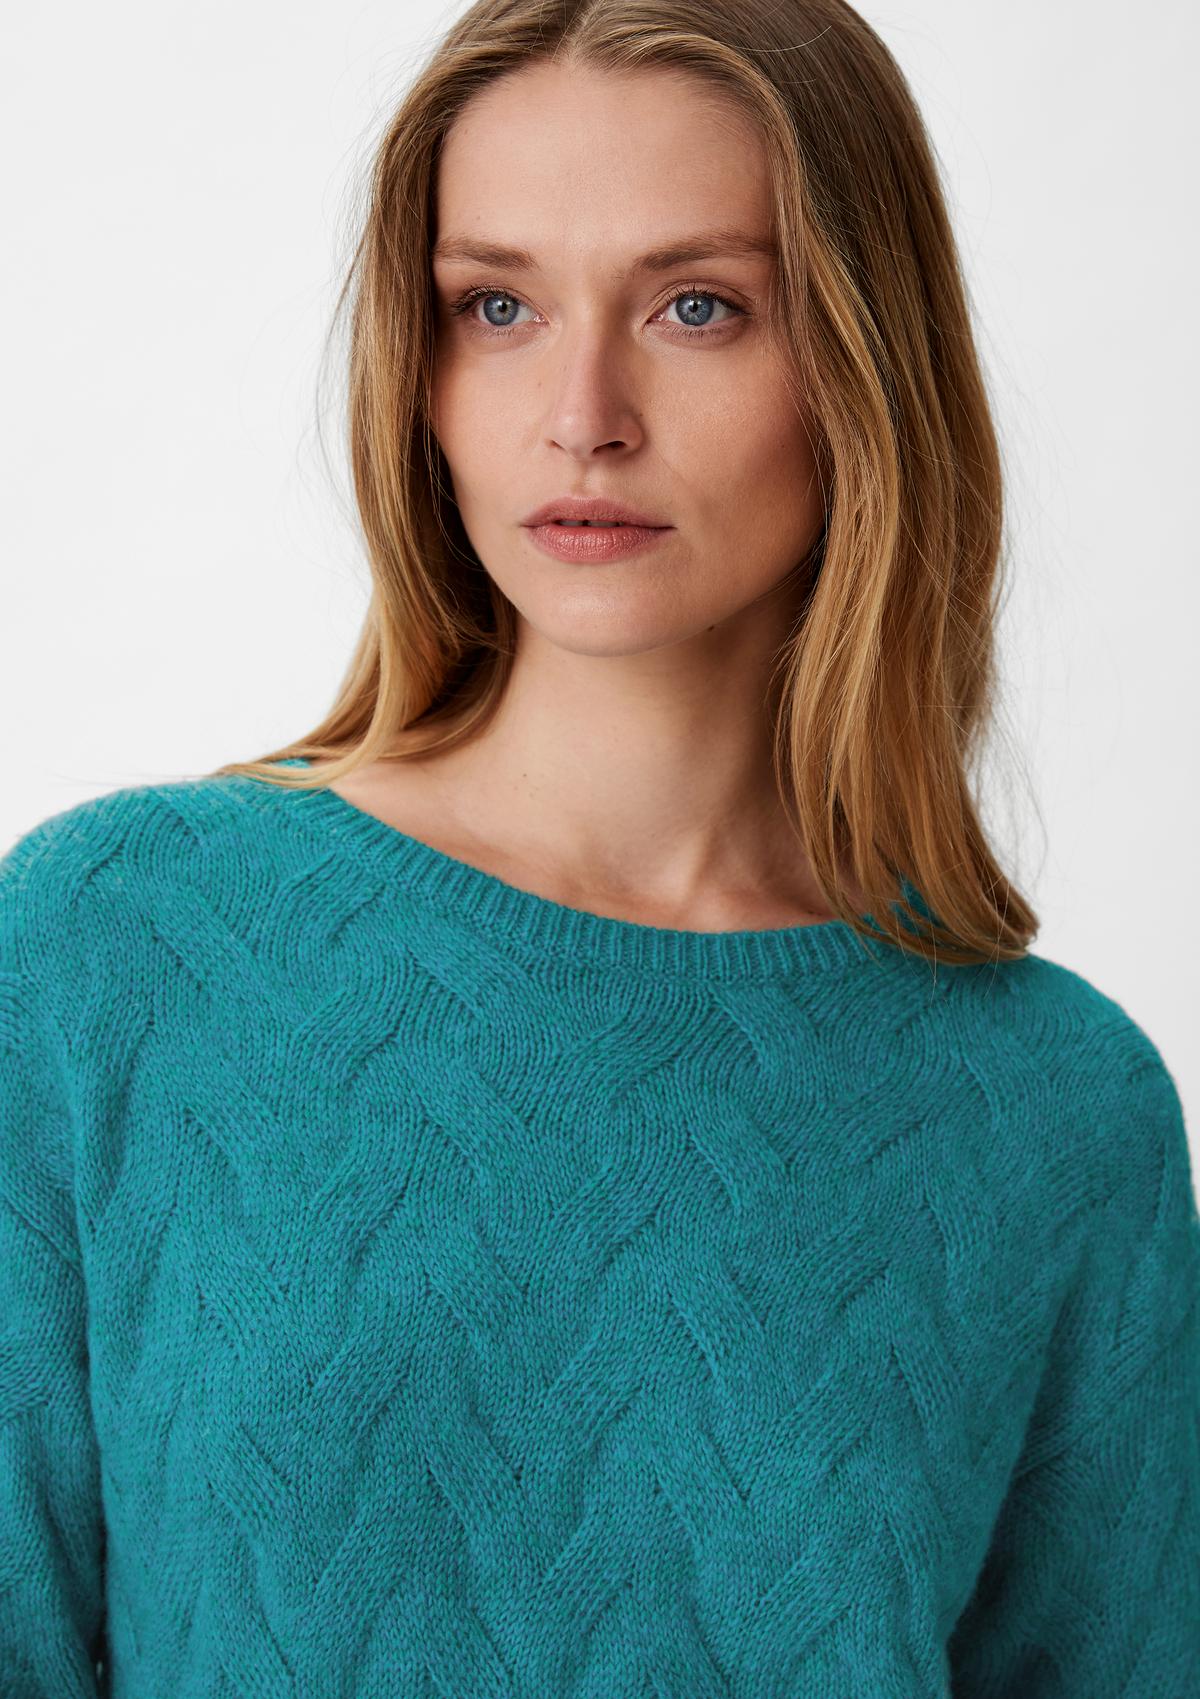 comma Knitted jumper with a cable pattern